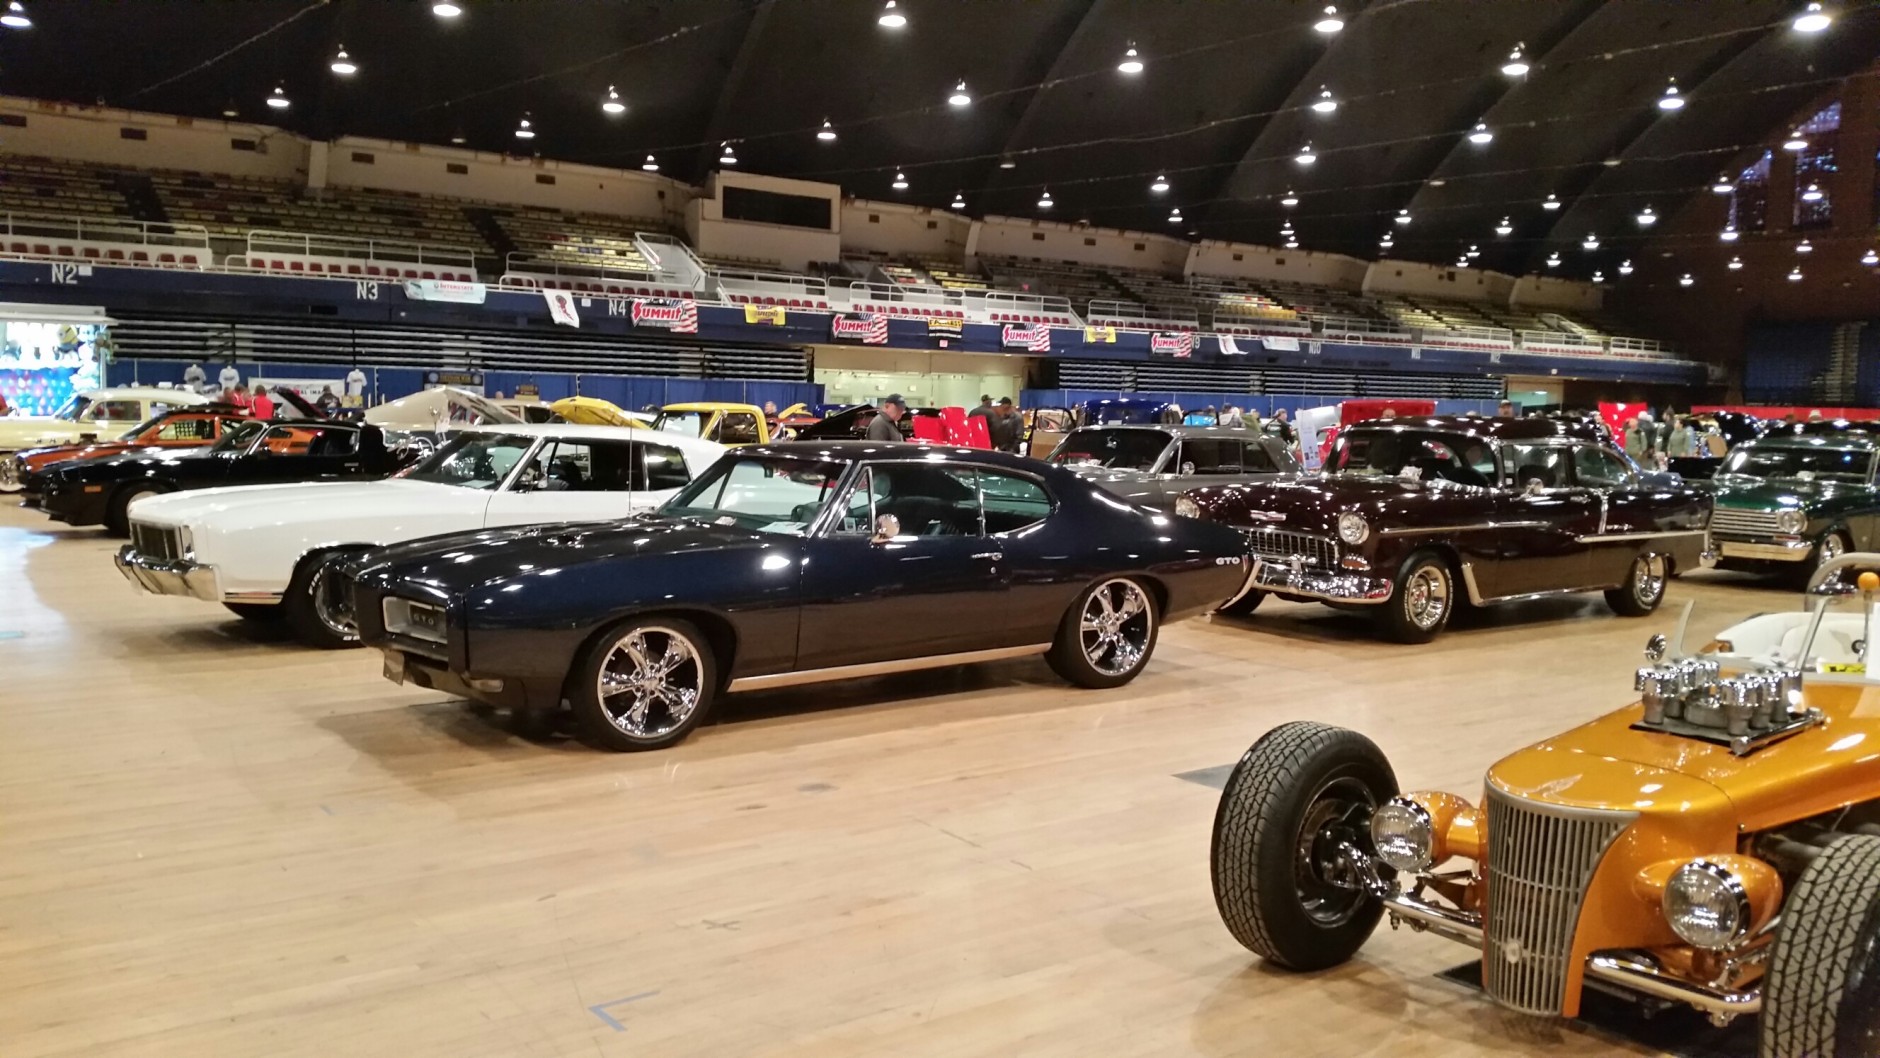 Inside the Military Benefit Car Show. (WTOP/Kathy Stewart)